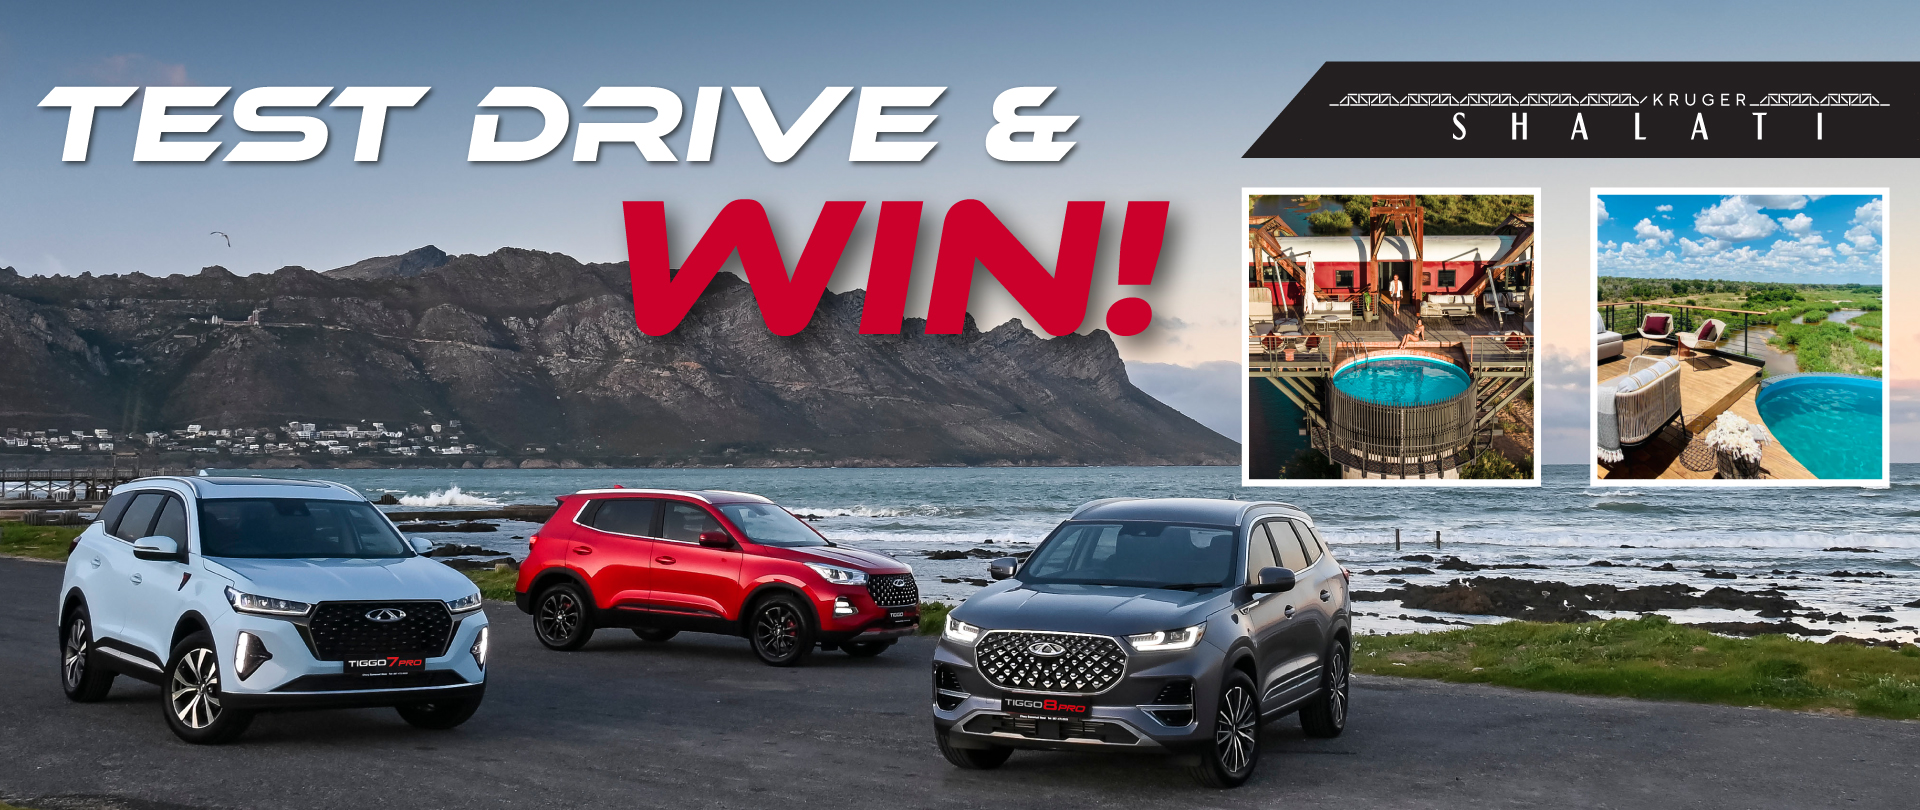 Chery celebrates its first birthday with massive prize draw for Sale in South Africa